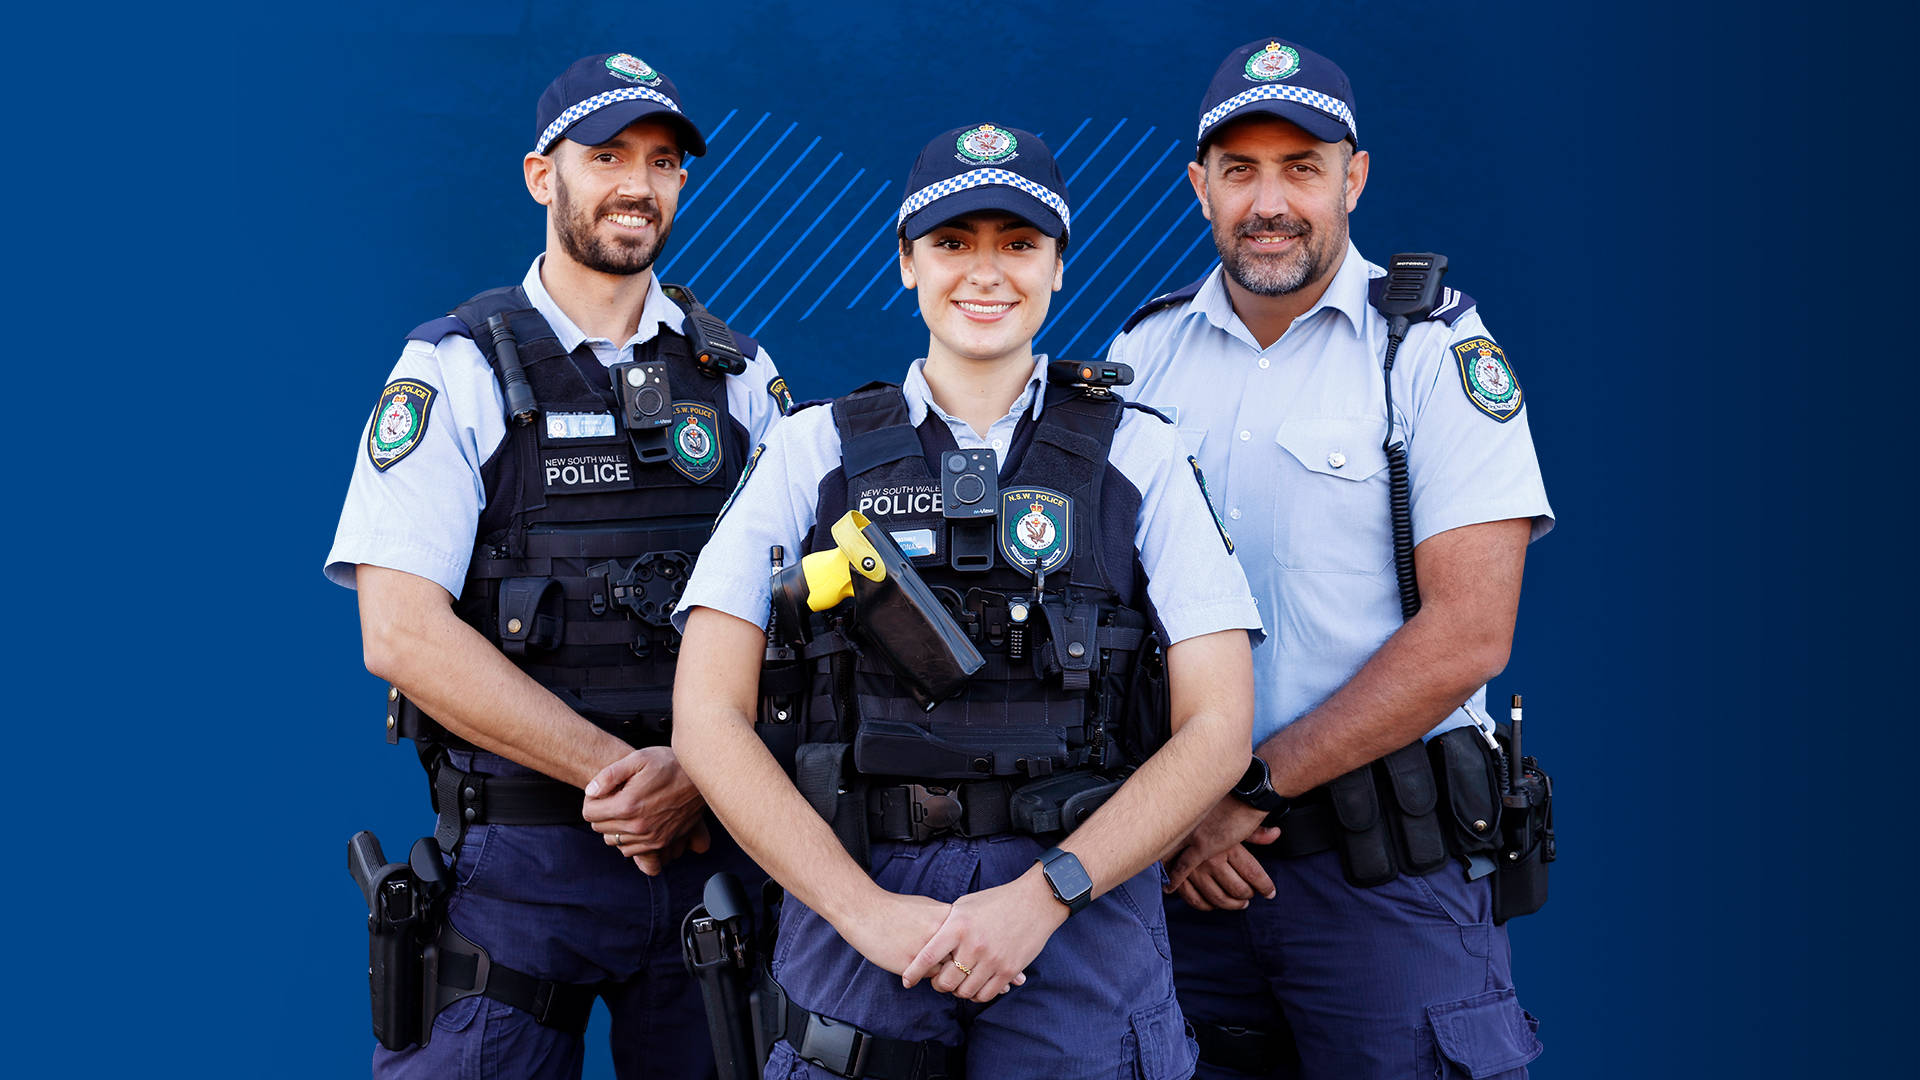 New South Wales Police Officer Uniform Wallpaper